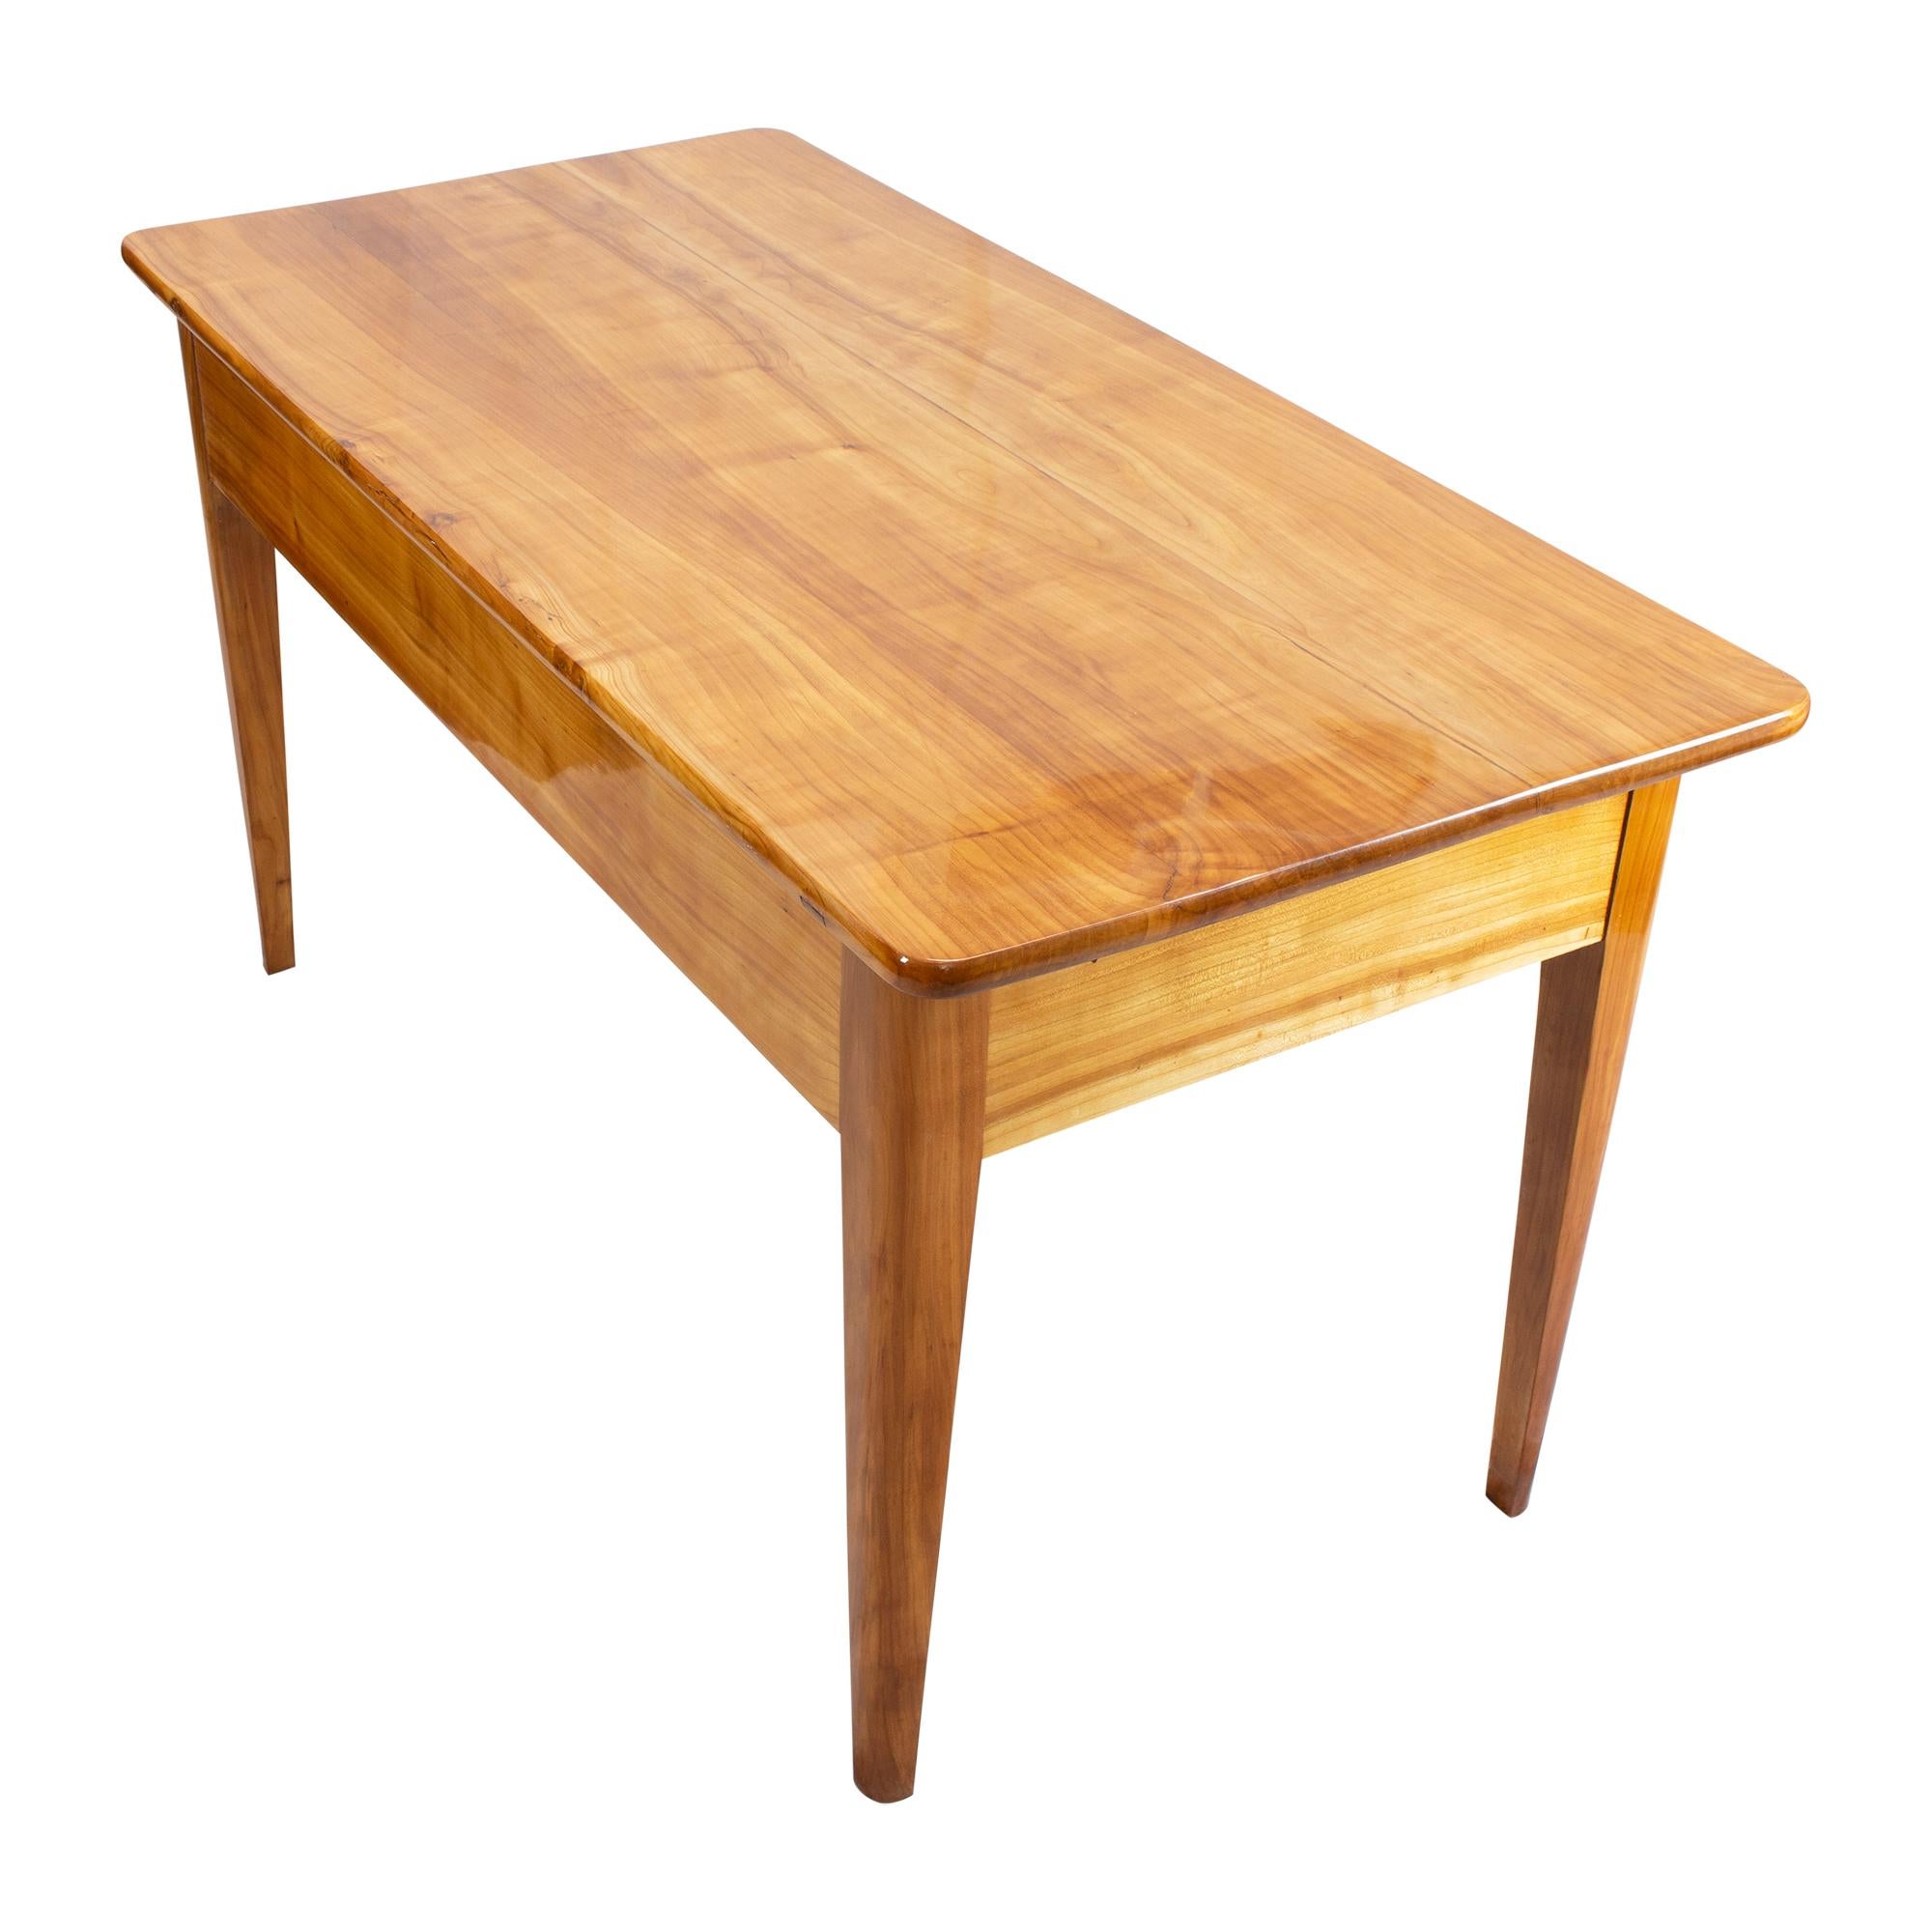 Polished 19th Century Biedermeier Solid Cherrywood Table For Sale